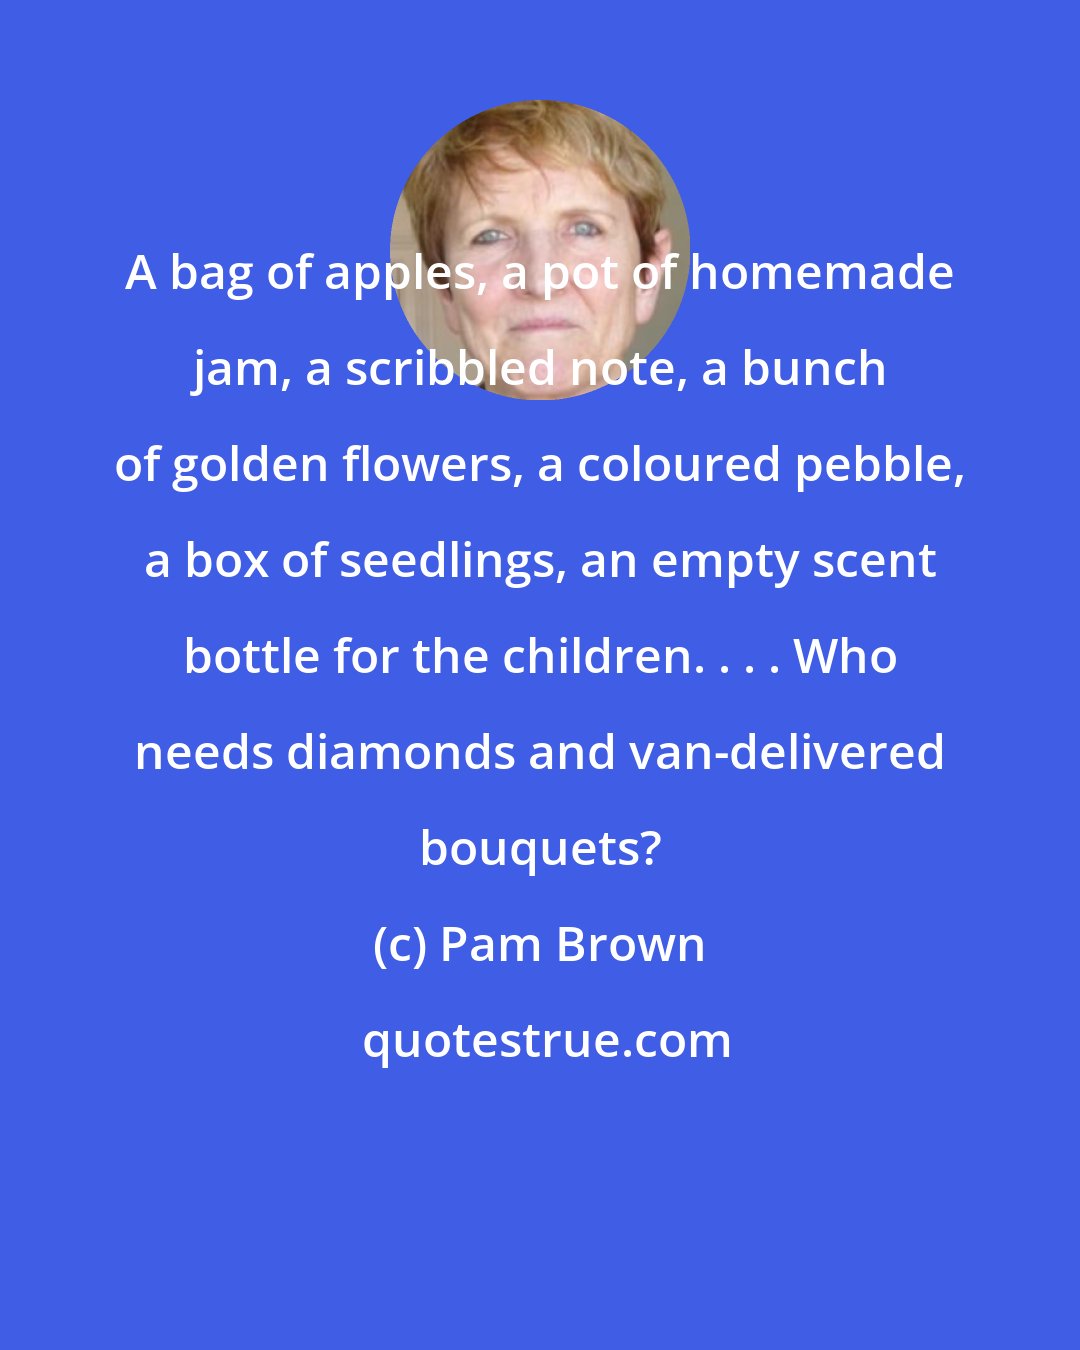 Pam Brown: A bag of apples, a pot of homemade jam, a scribbled note, a bunch of golden flowers, a coloured pebble, a box of seedlings, an empty scent bottle for the children. . . . Who needs diamonds and van-delivered bouquets?